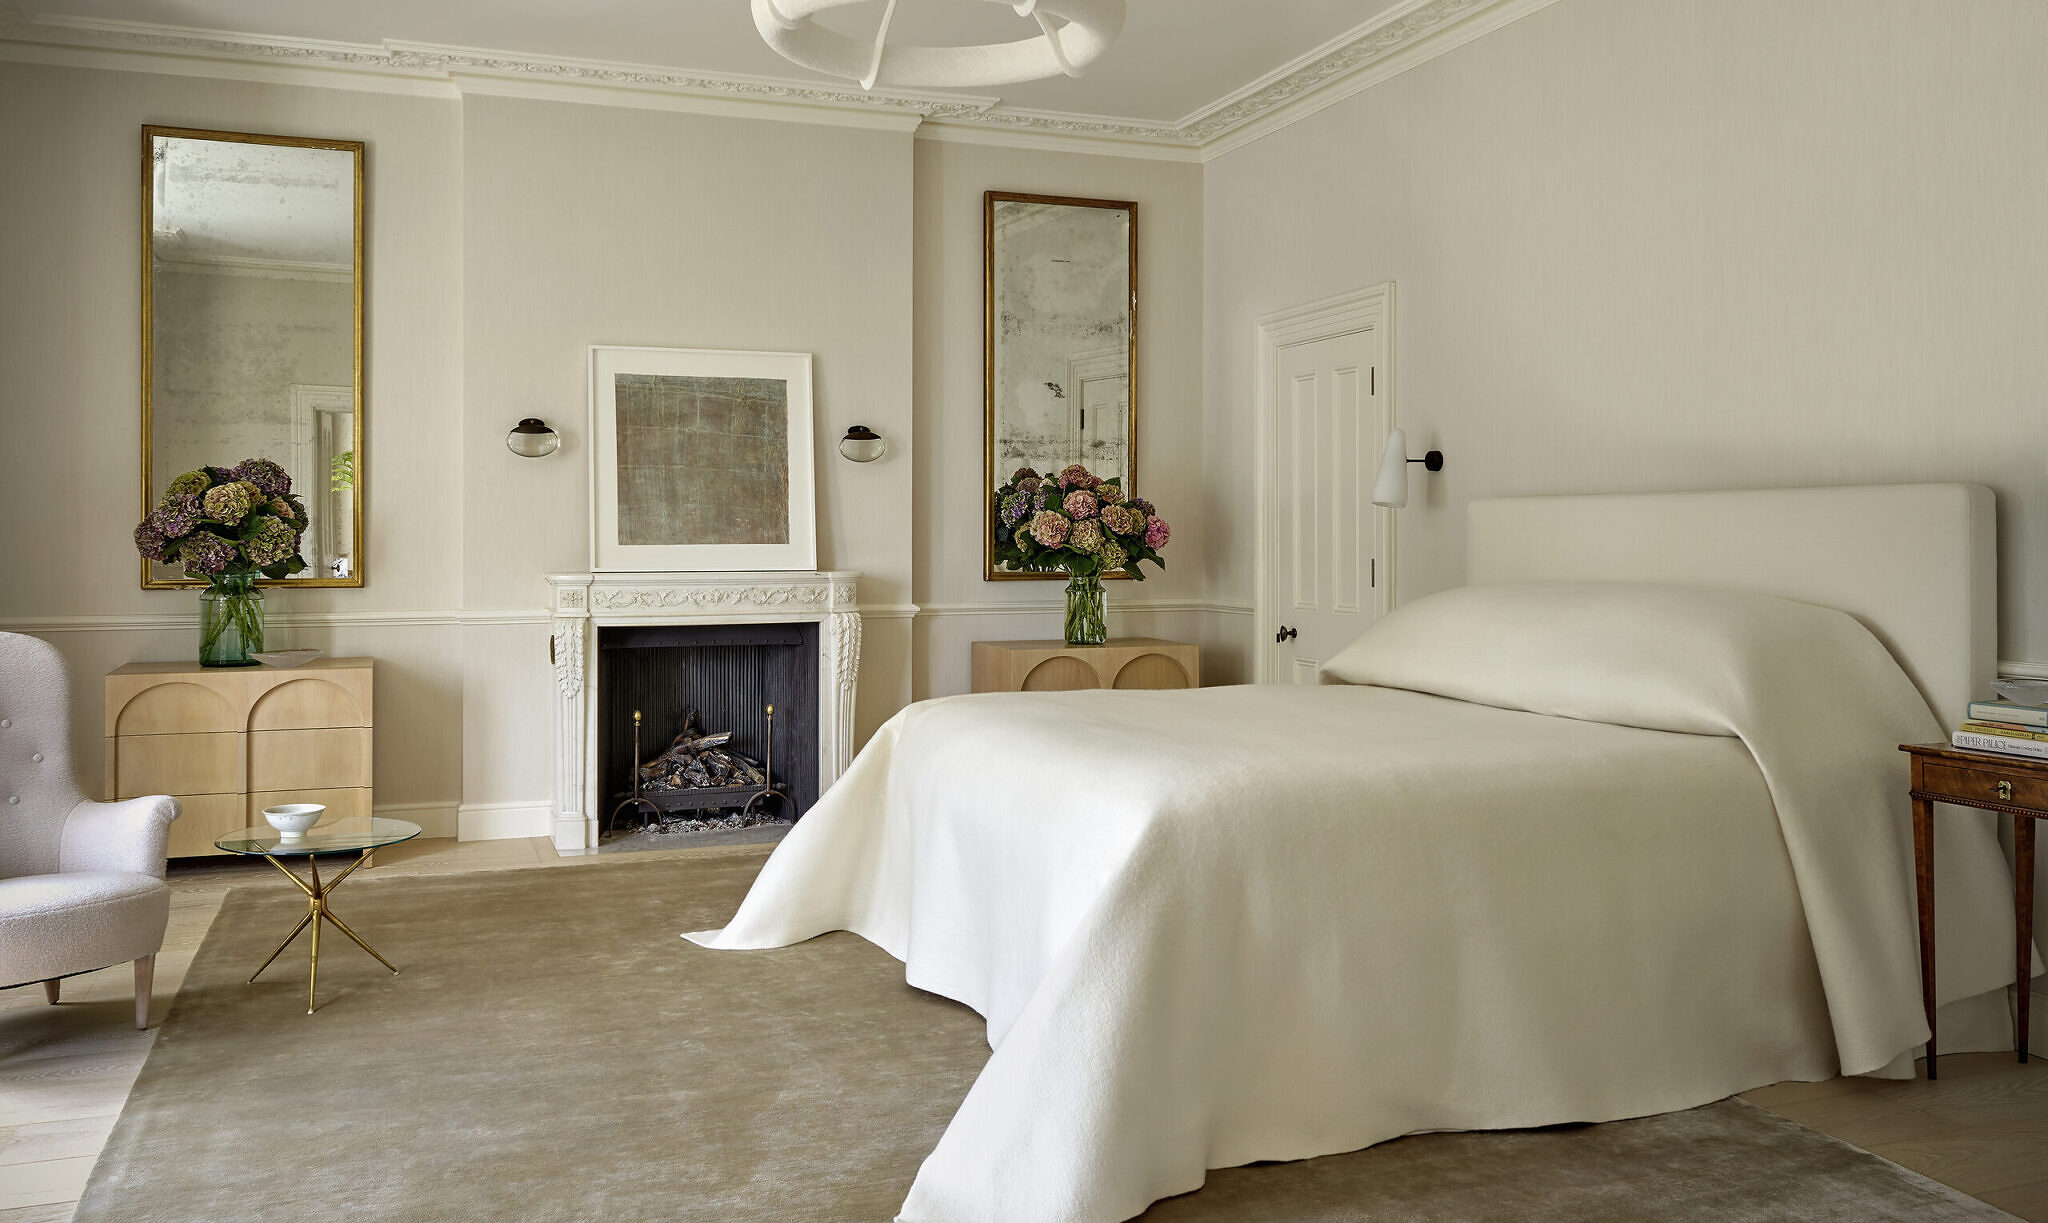 Image of a bedroom which has white bedding, white fireplace, and white ceiling lamp. The drawer units are good with circular detailing.